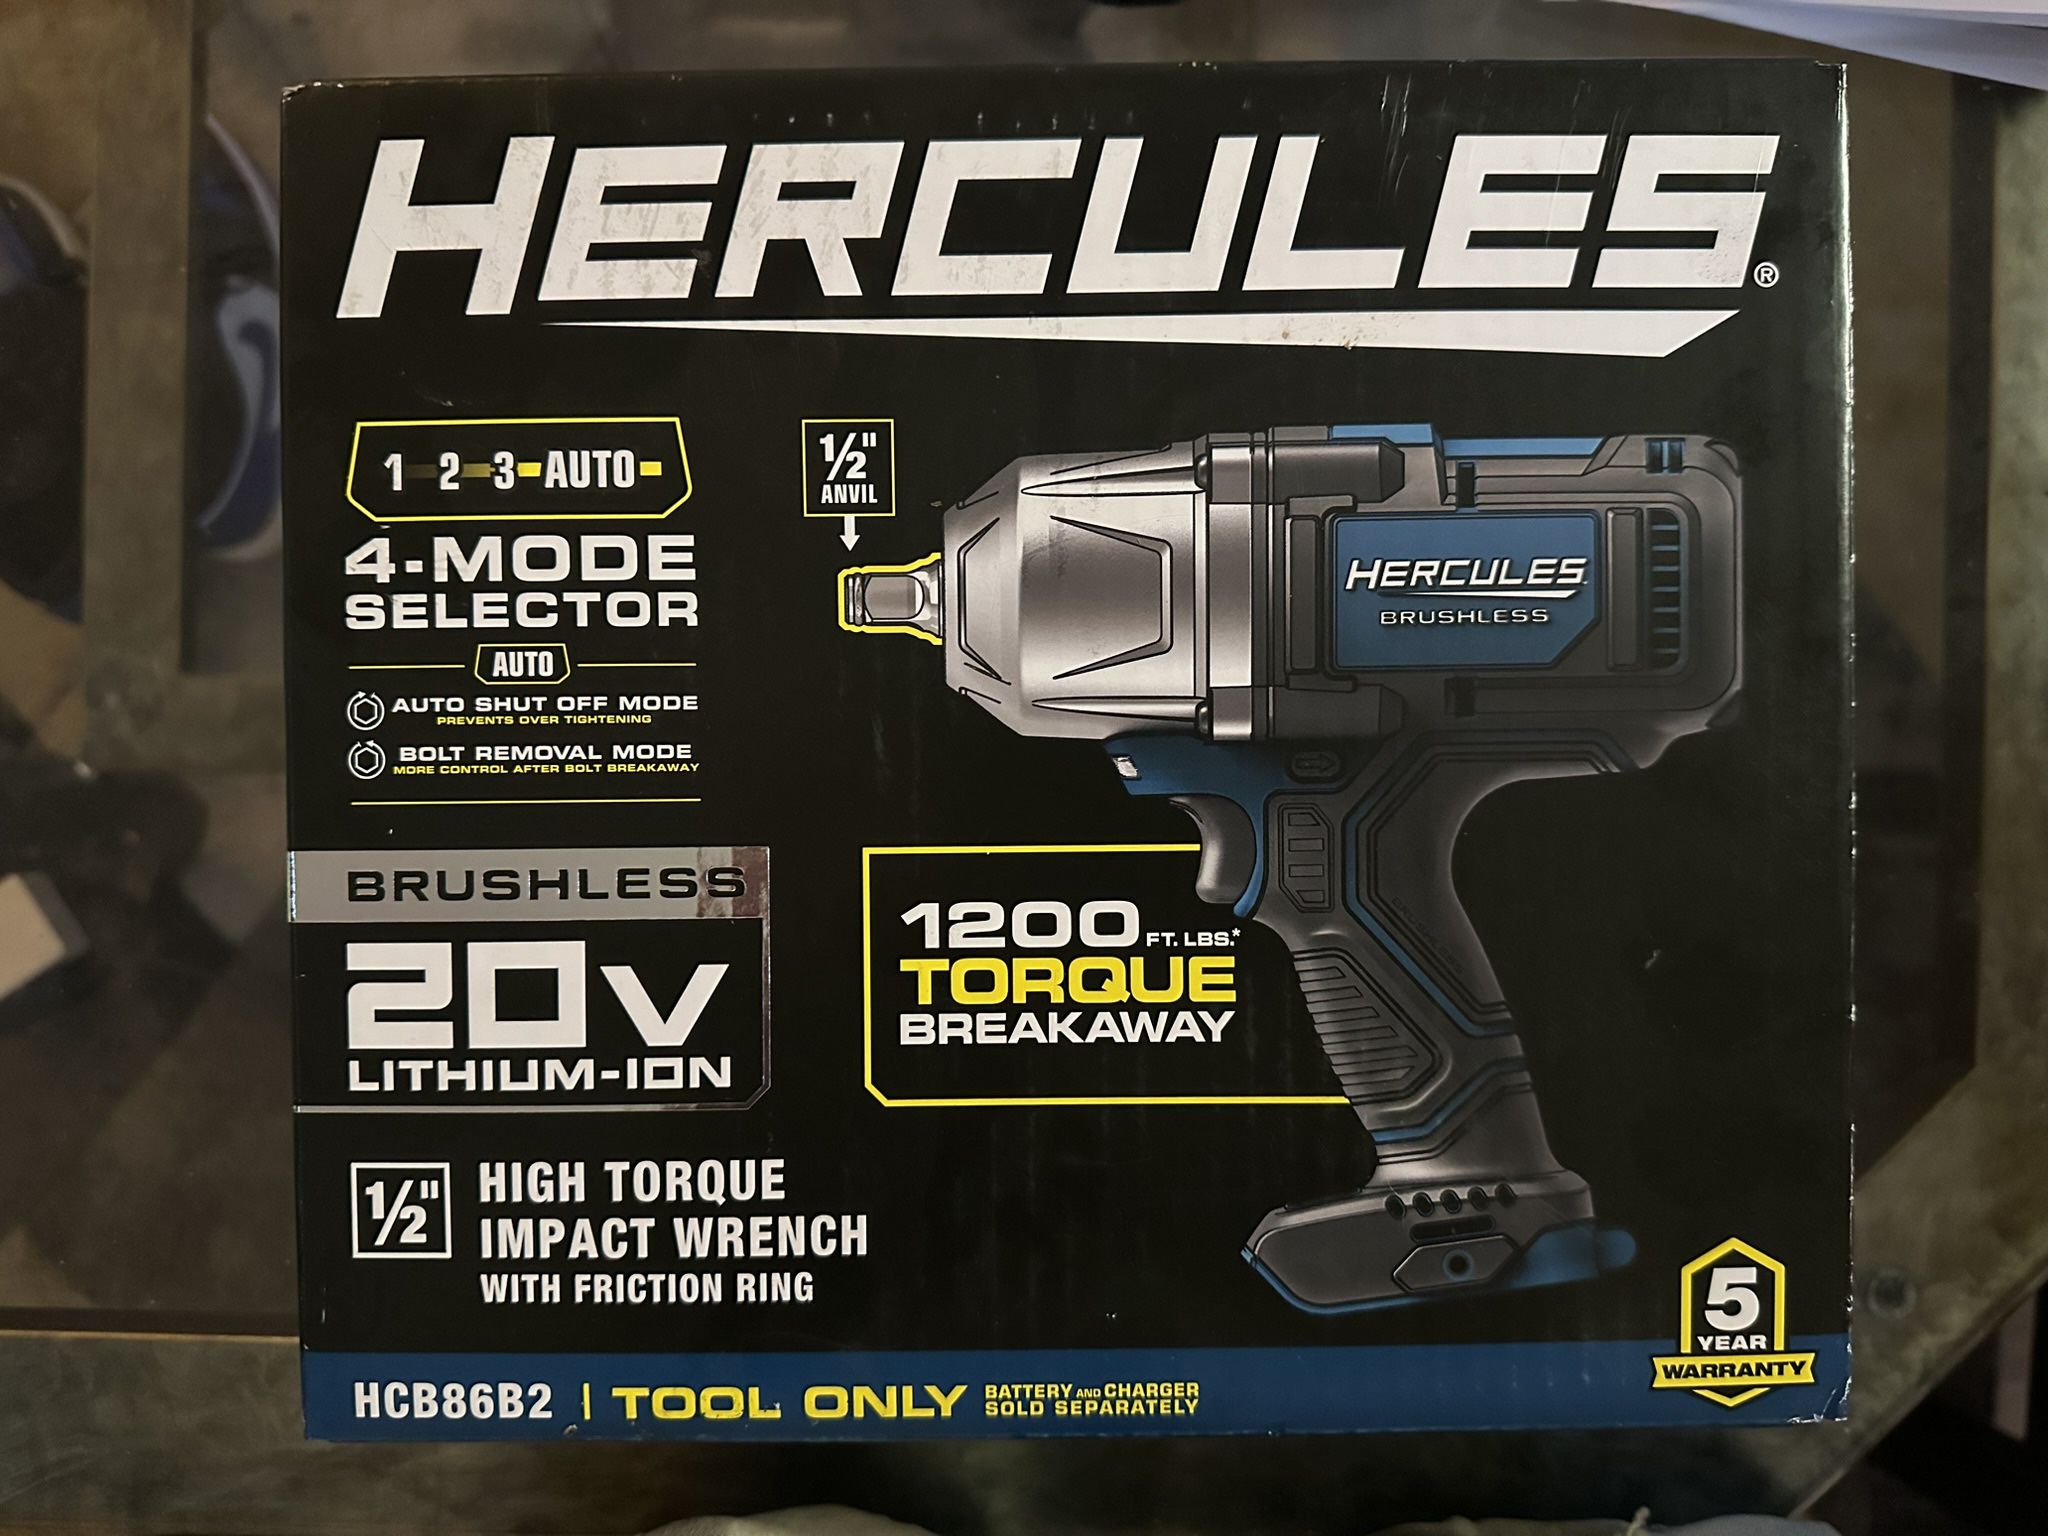 HERCULES HIGH TORQUE IMPACT WRENCH AND BRUSHLESS COMPACT IMPACT DRIVER HERCULES COMBO KIT